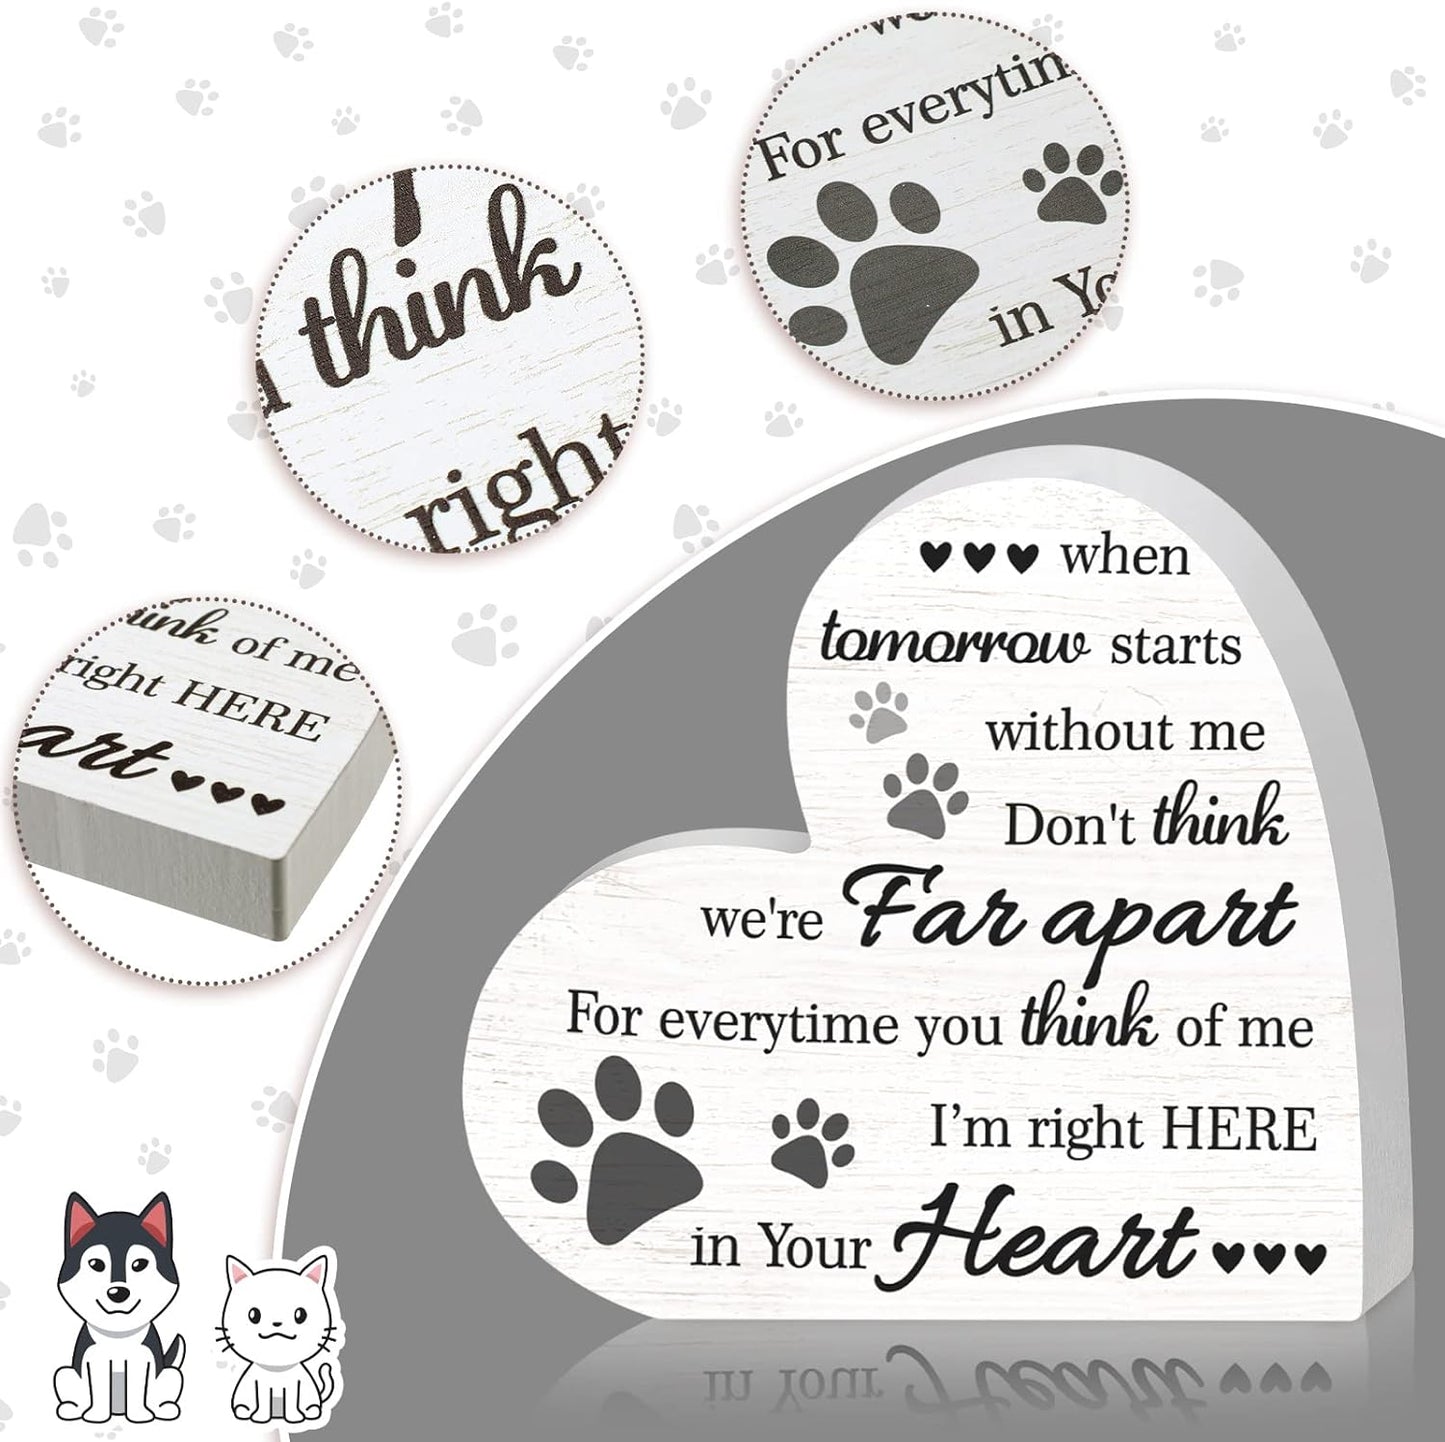 Pet Memorial Gifts Bereavement Remembrance Gifts for Loss of Dog Cat - Heart Shaped Wood Sign When Tomorrow Starts Without Me Wooden Plaque